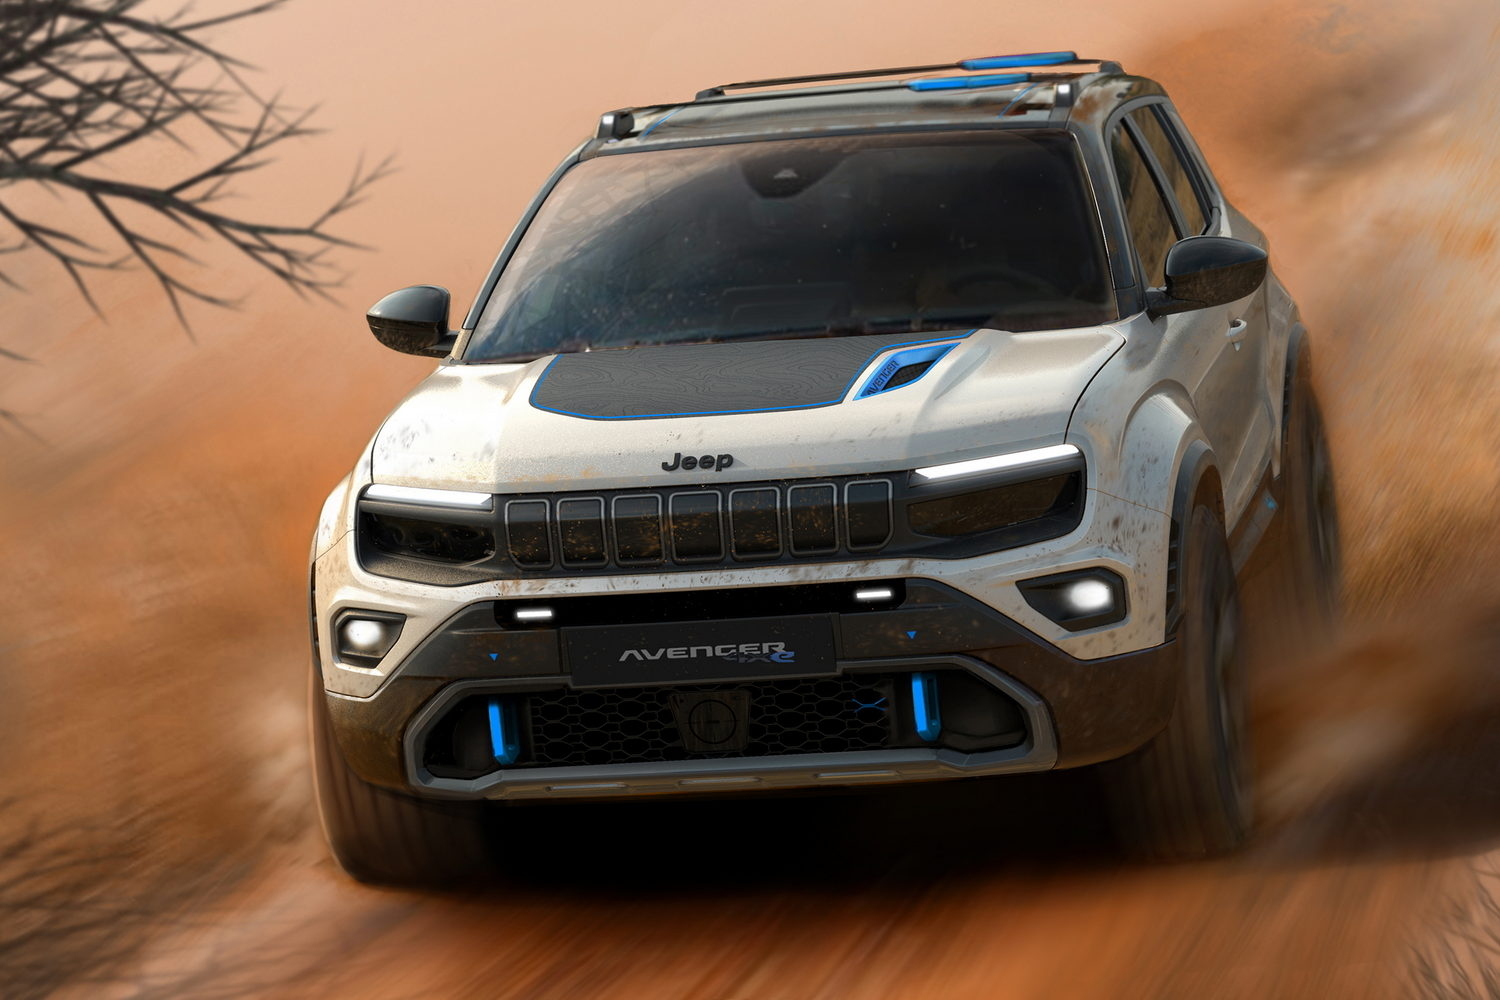 Car News | Jeep Avenger 4x4 on the way | CompleteCar.ie